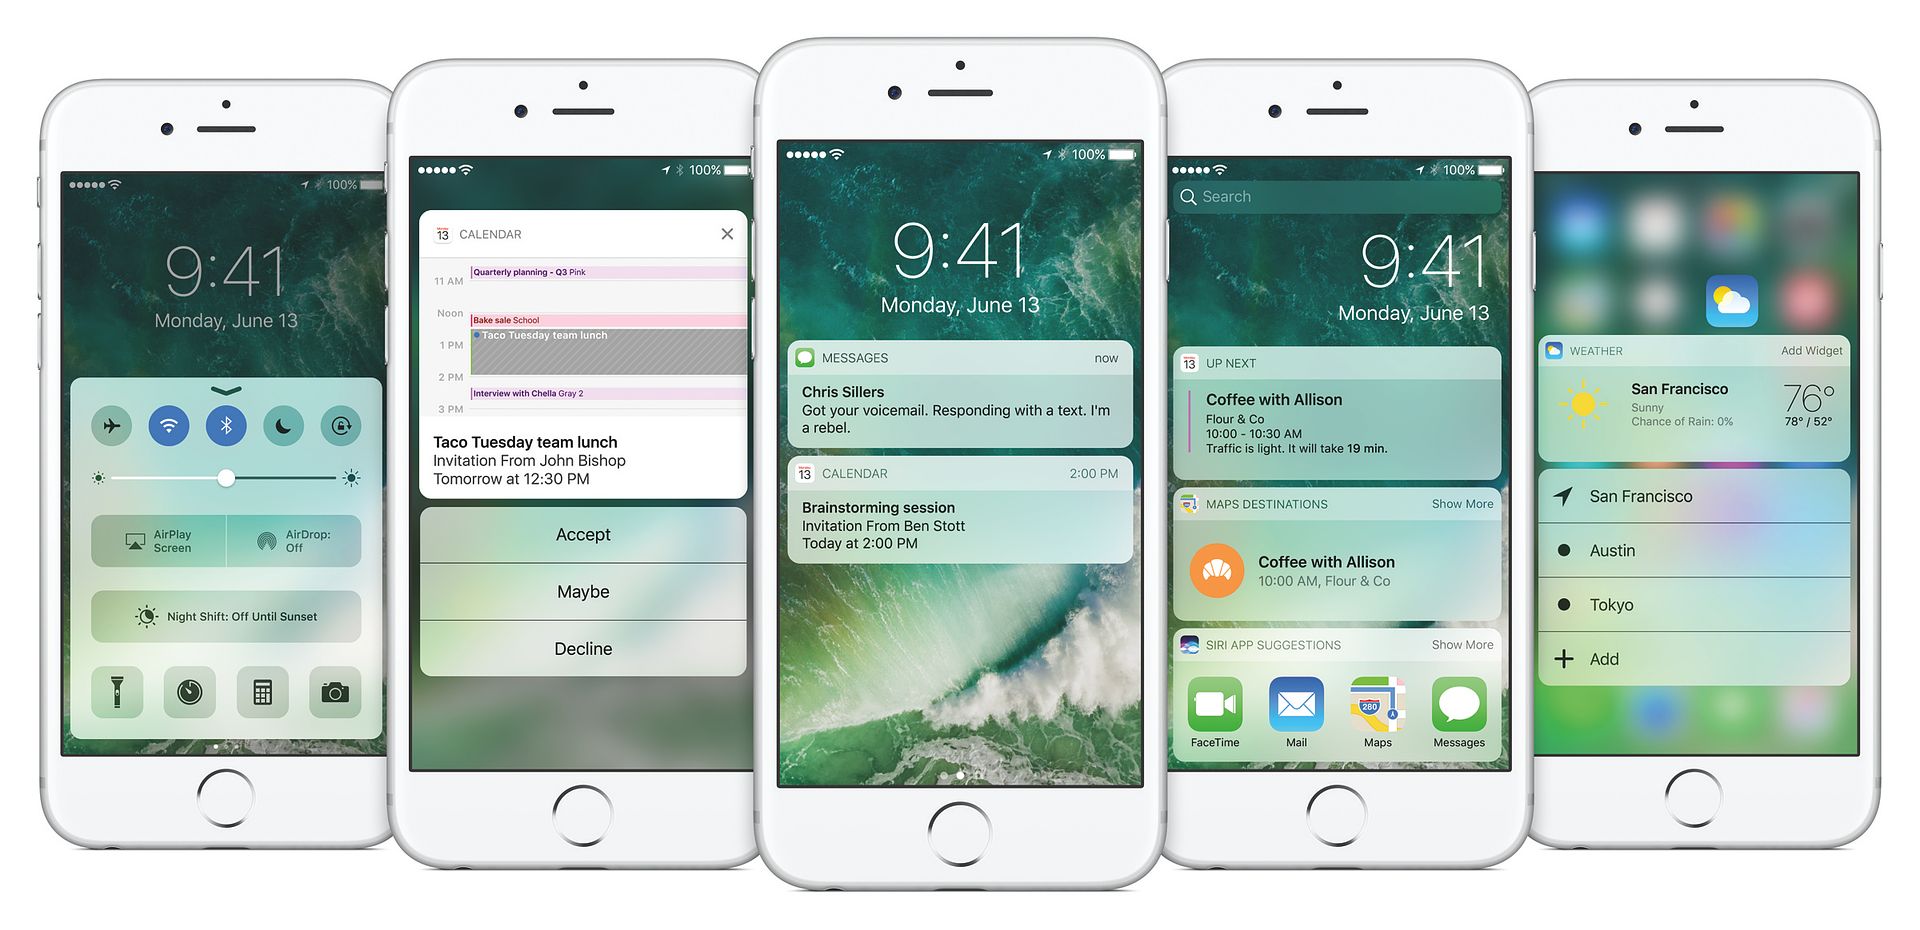 10 iOS 10 features you need to know about: The customizable lock screen and Favorites widget | Cool Mom Tech